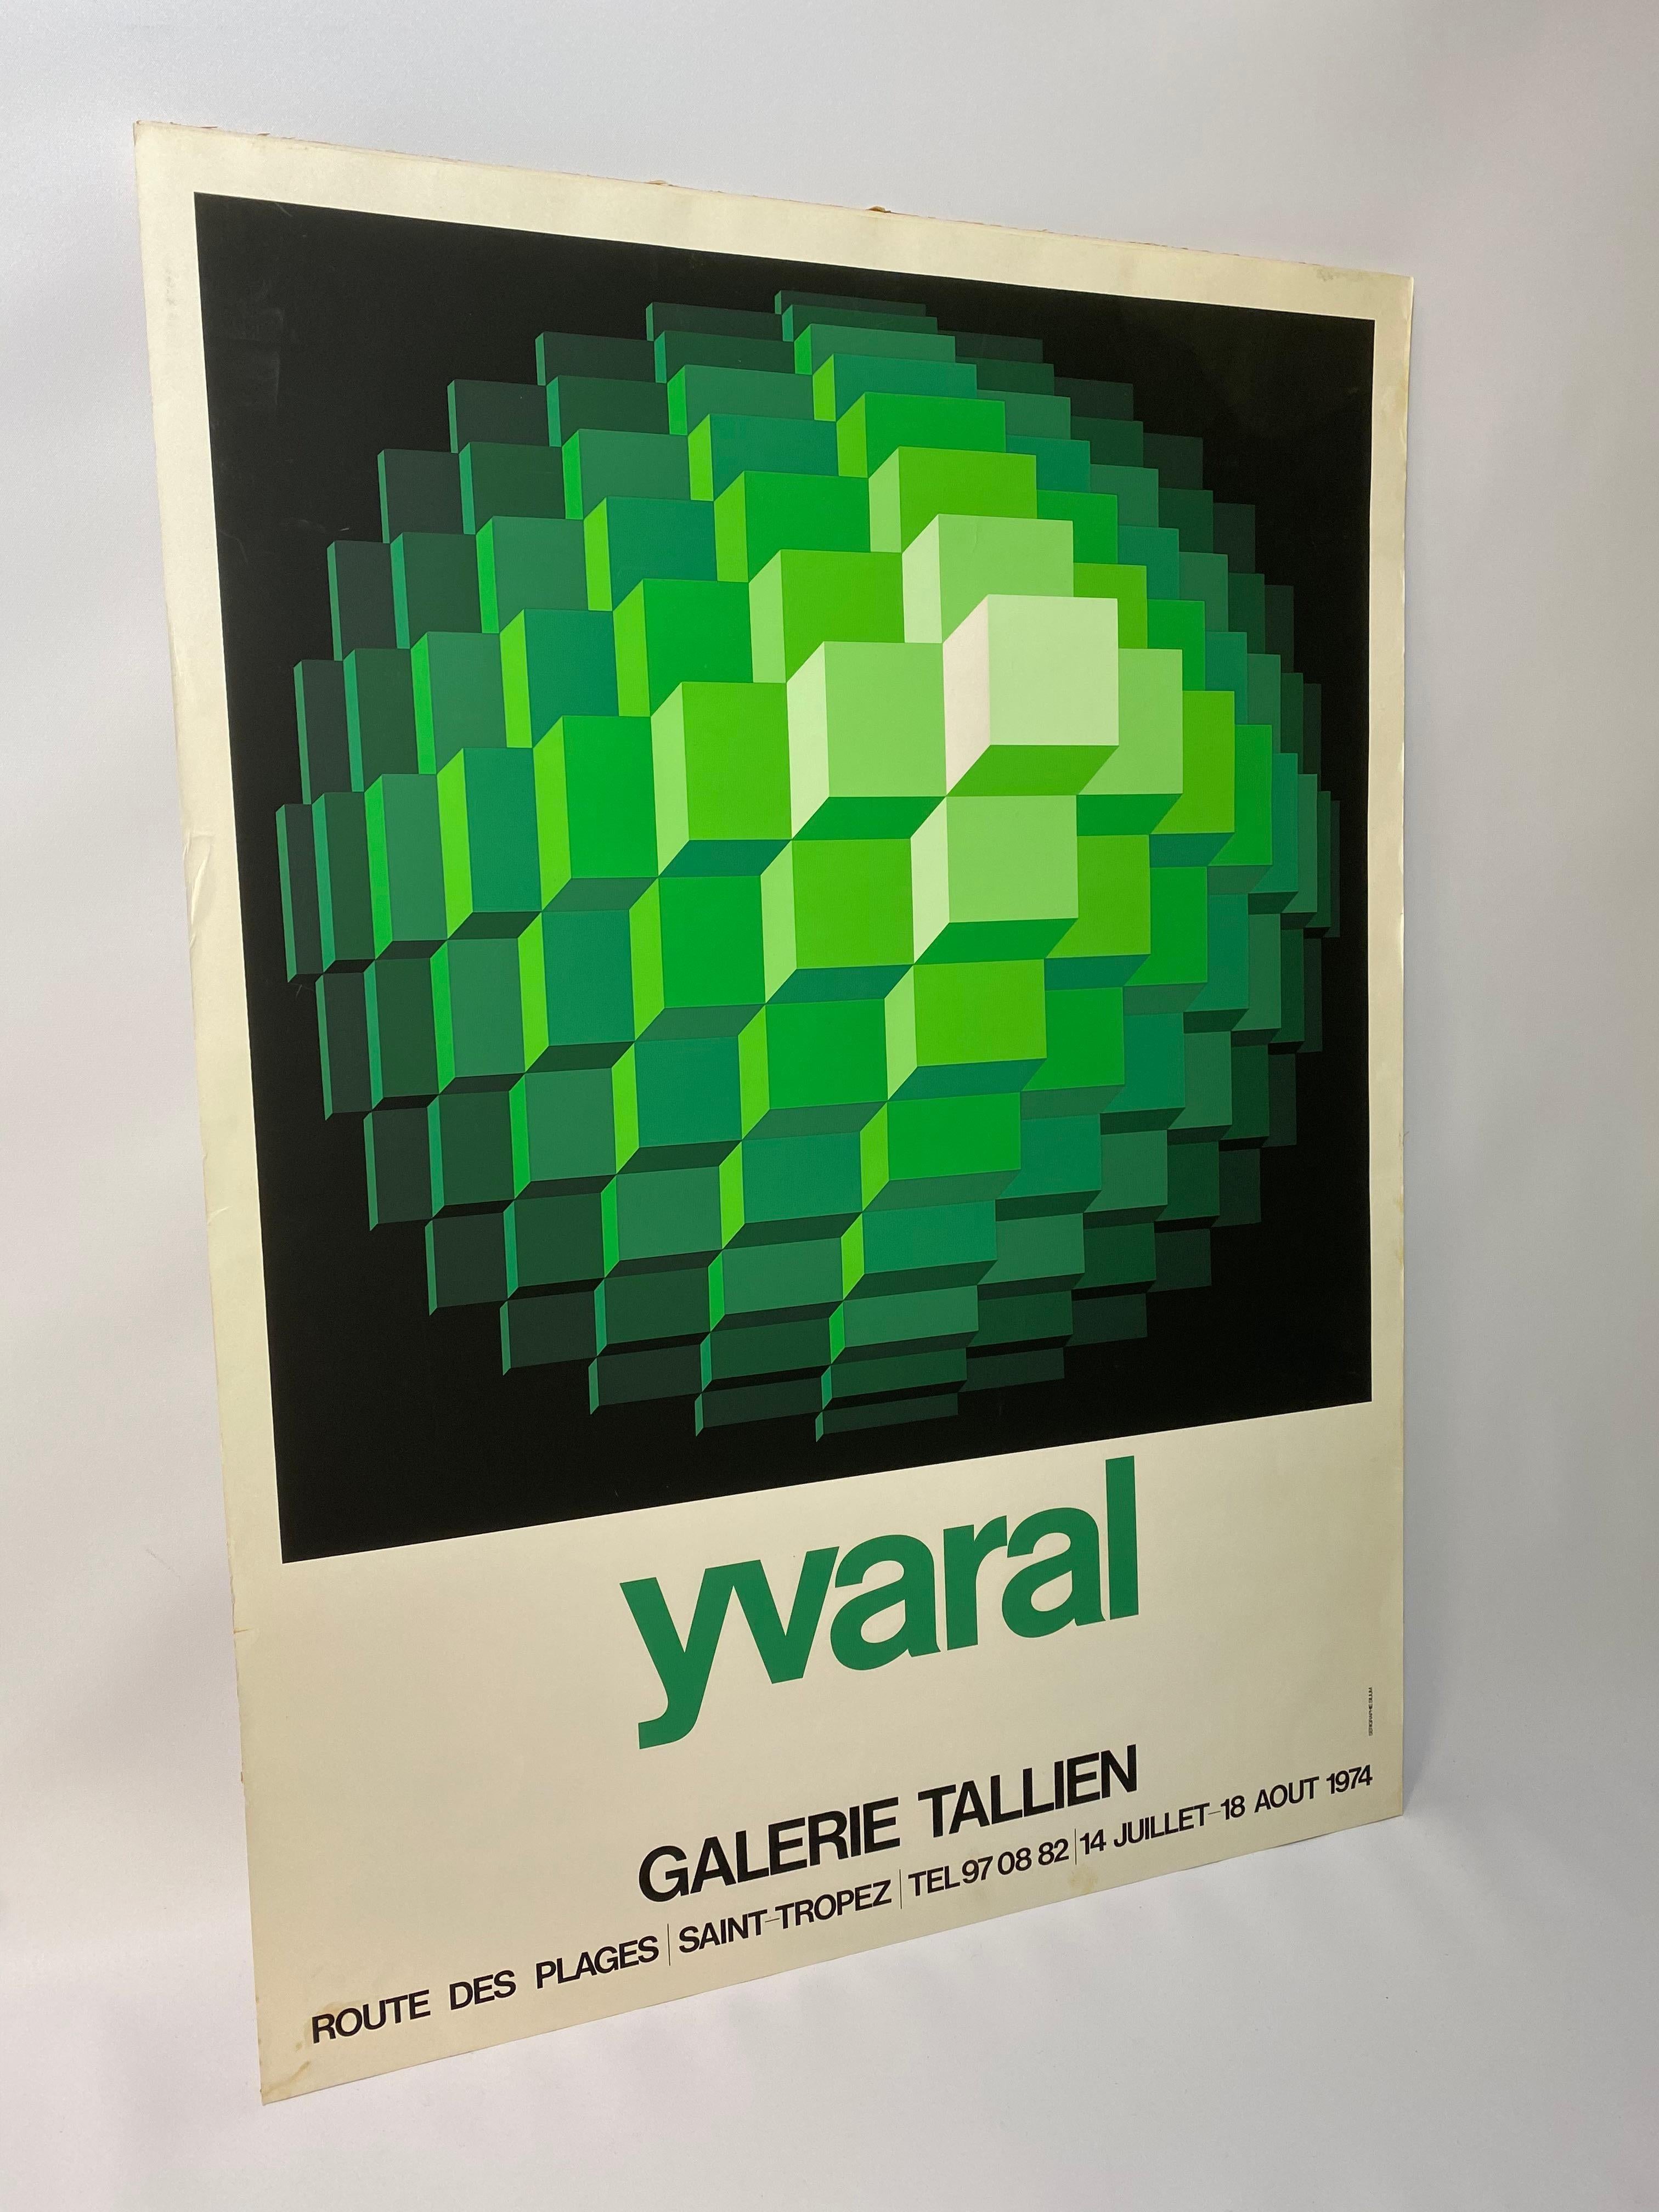 Yvaral (Jean-Pierre Vasarely), son of Victor Vasarely, Galerie Tallien 1974 Serigraph Op-Art exhibition poster. Seregraphie Silium. Loose, unmounted poster. Good overall condition with some staining and minor creases. Jean-Pierre and Victor